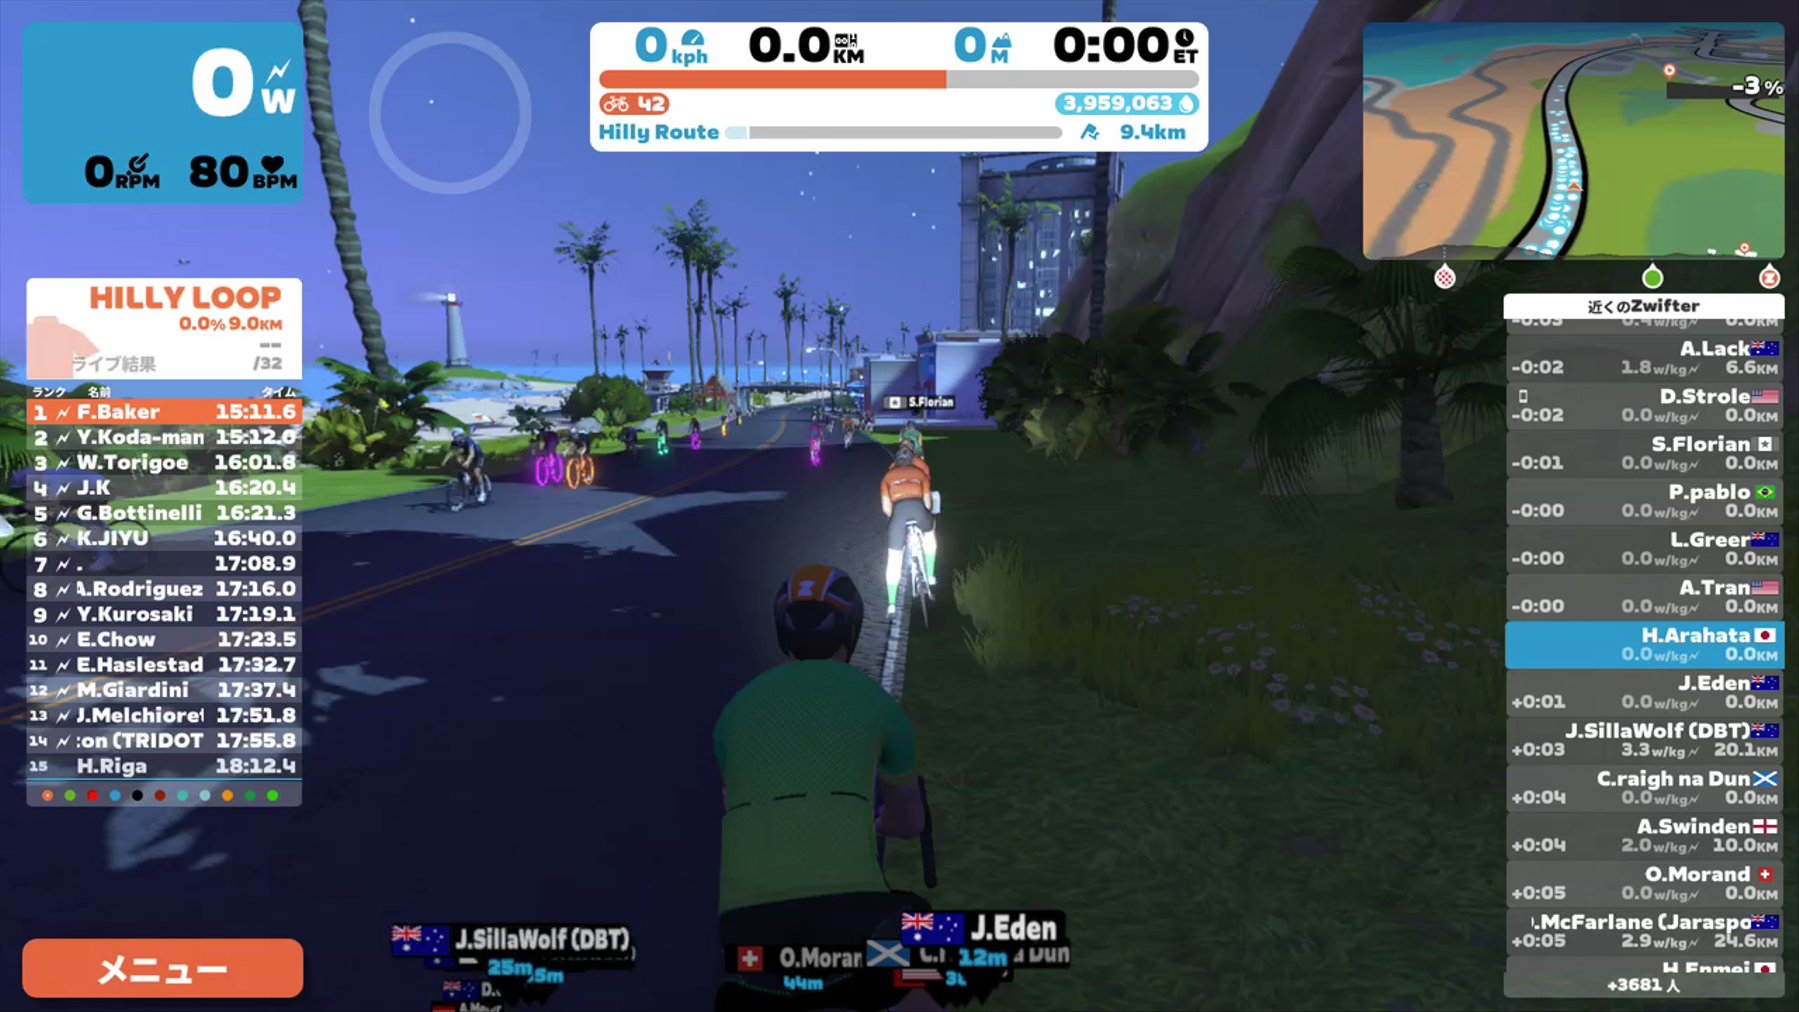 Zwift - Hilly Route in Watopia